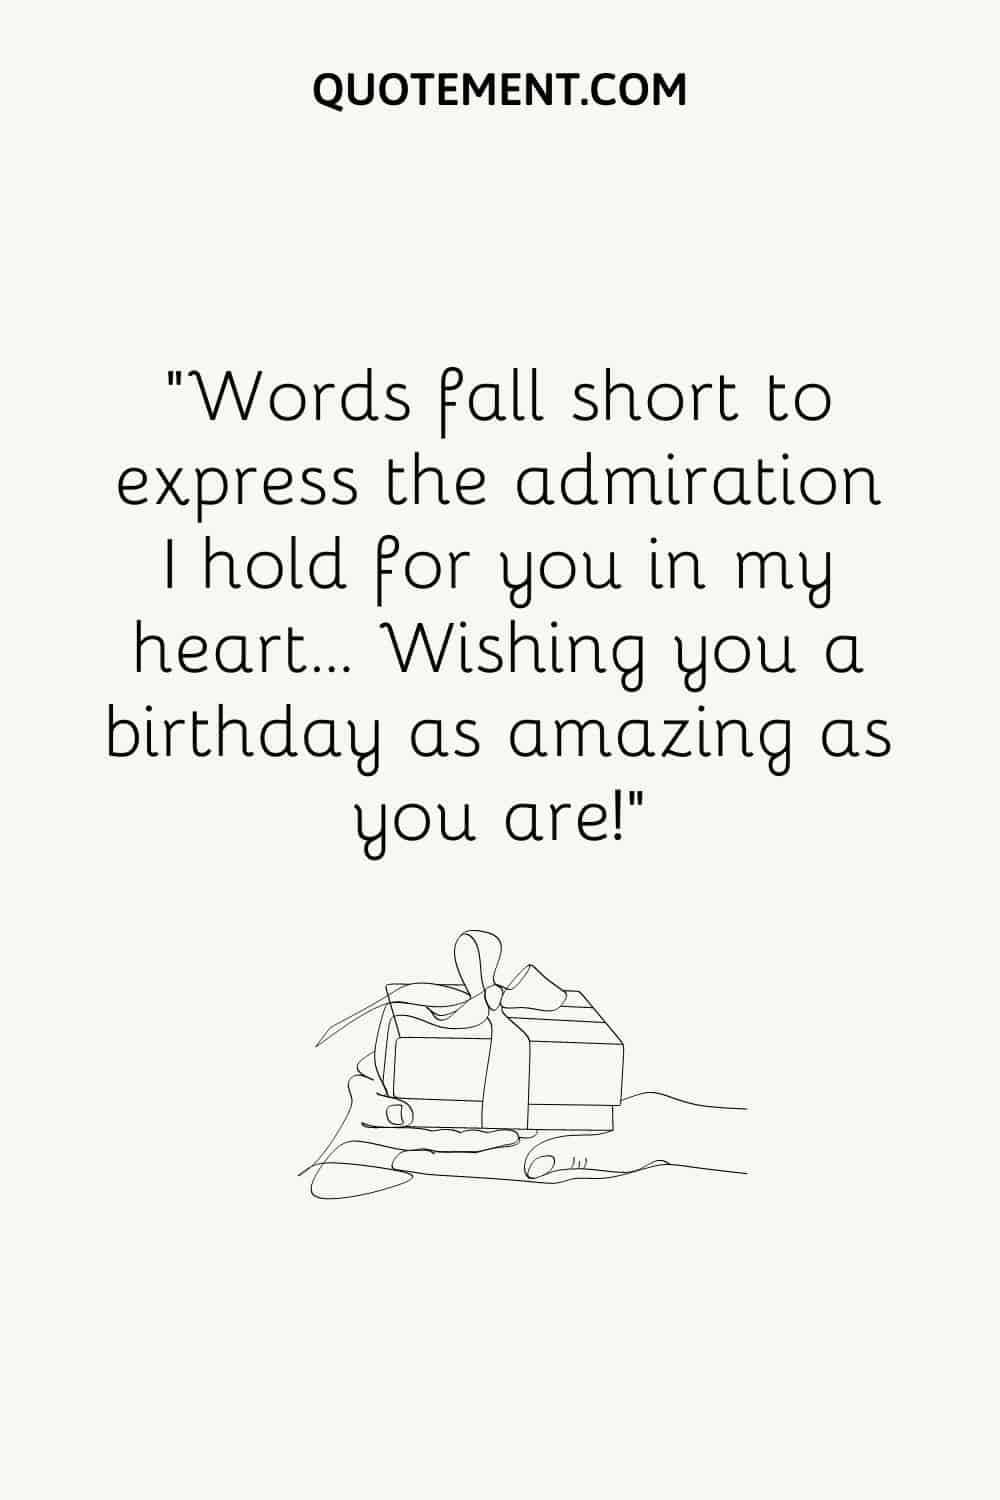 Words fall short to express the admiration I hold for you in my heart…